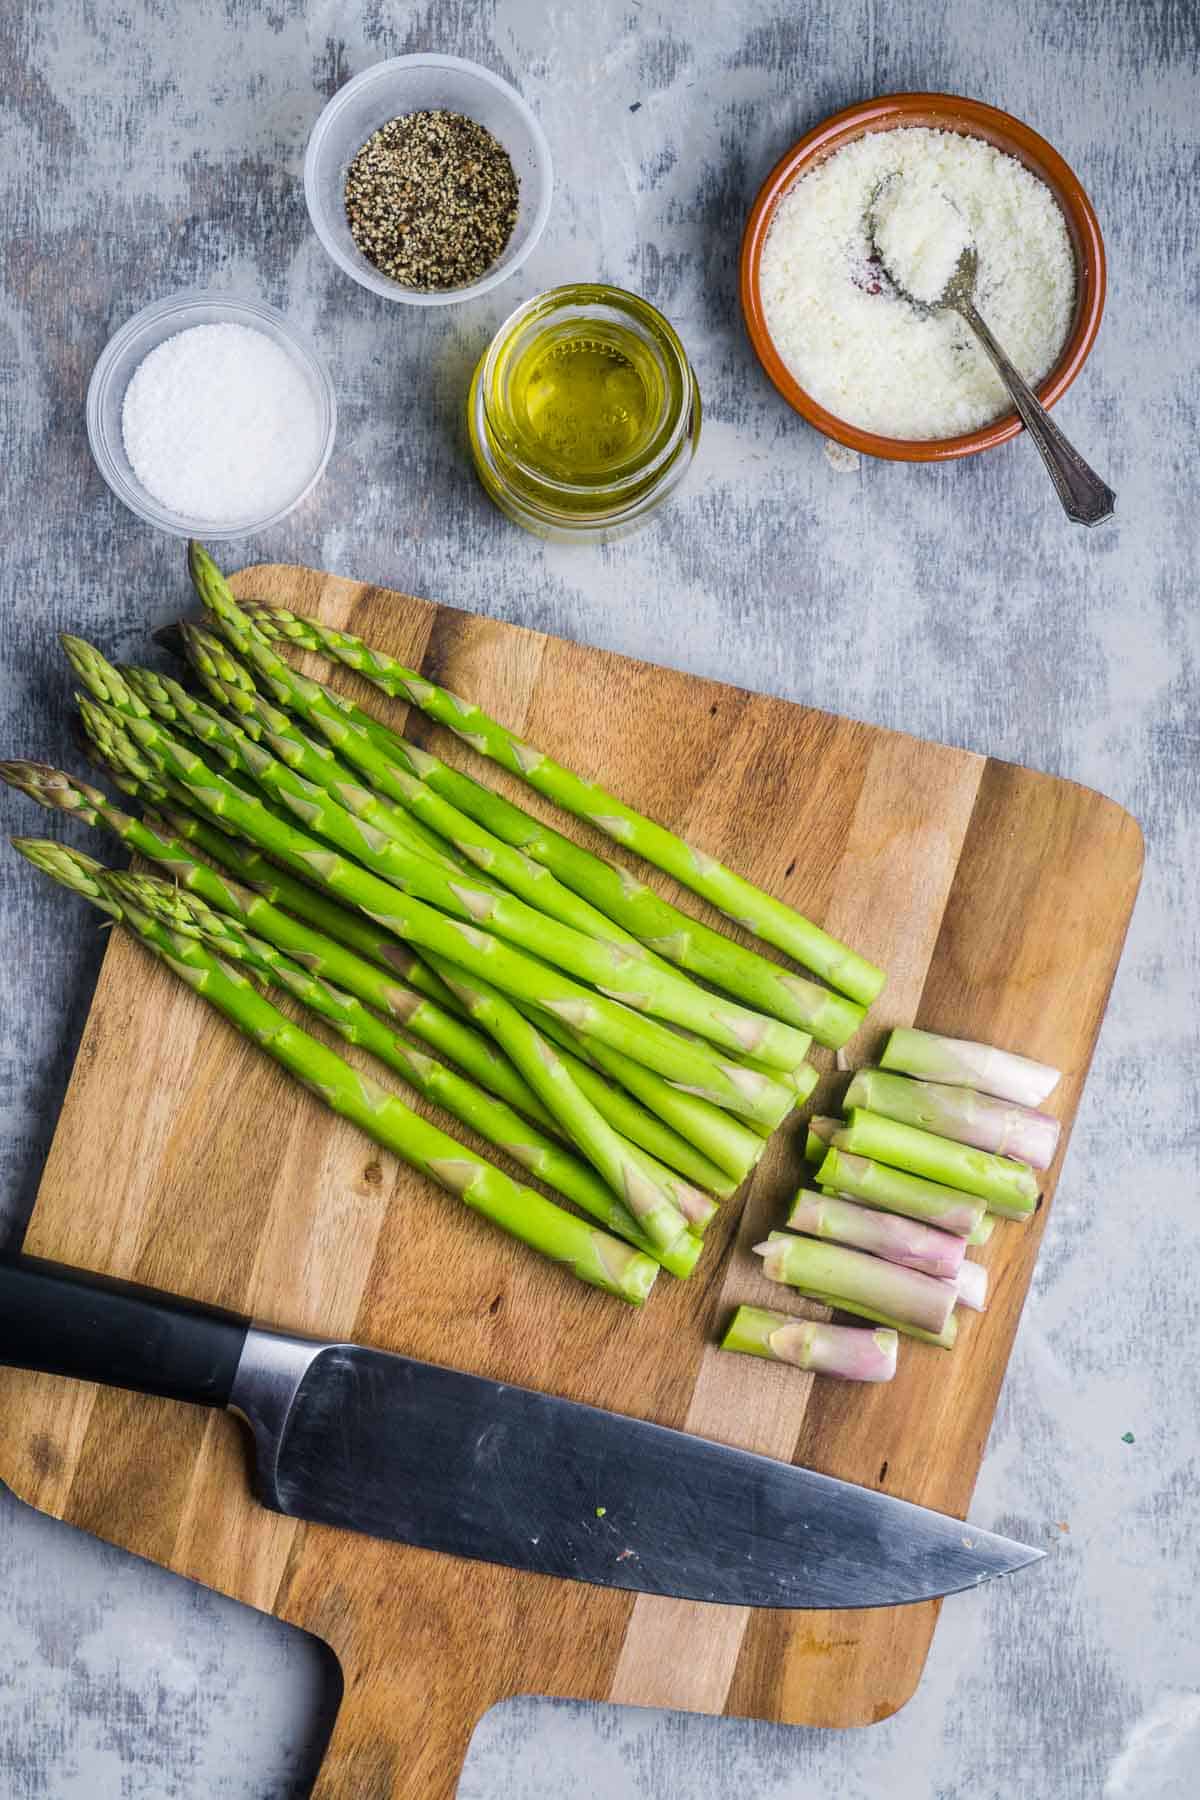 trimmed asparagus and chef knife on cutting board next to containers of Parmesan, salt, pepper, and oil